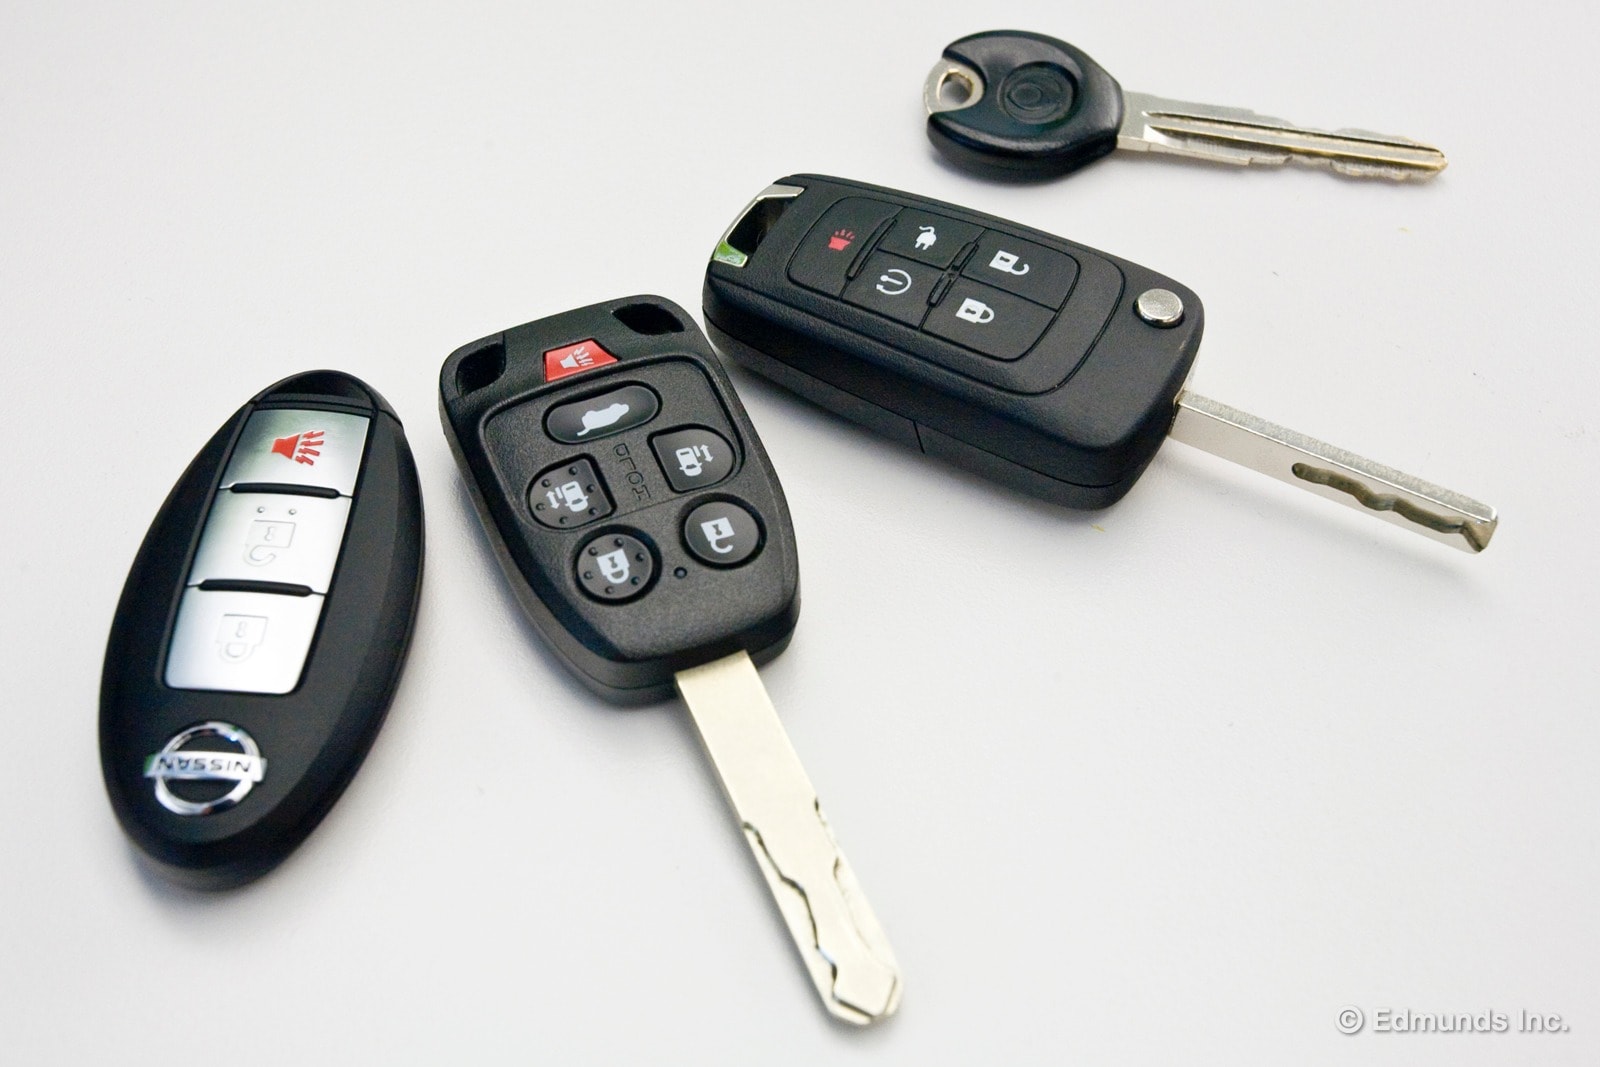 Get a New Key Made for My Car: Quick and Affordable Replacement